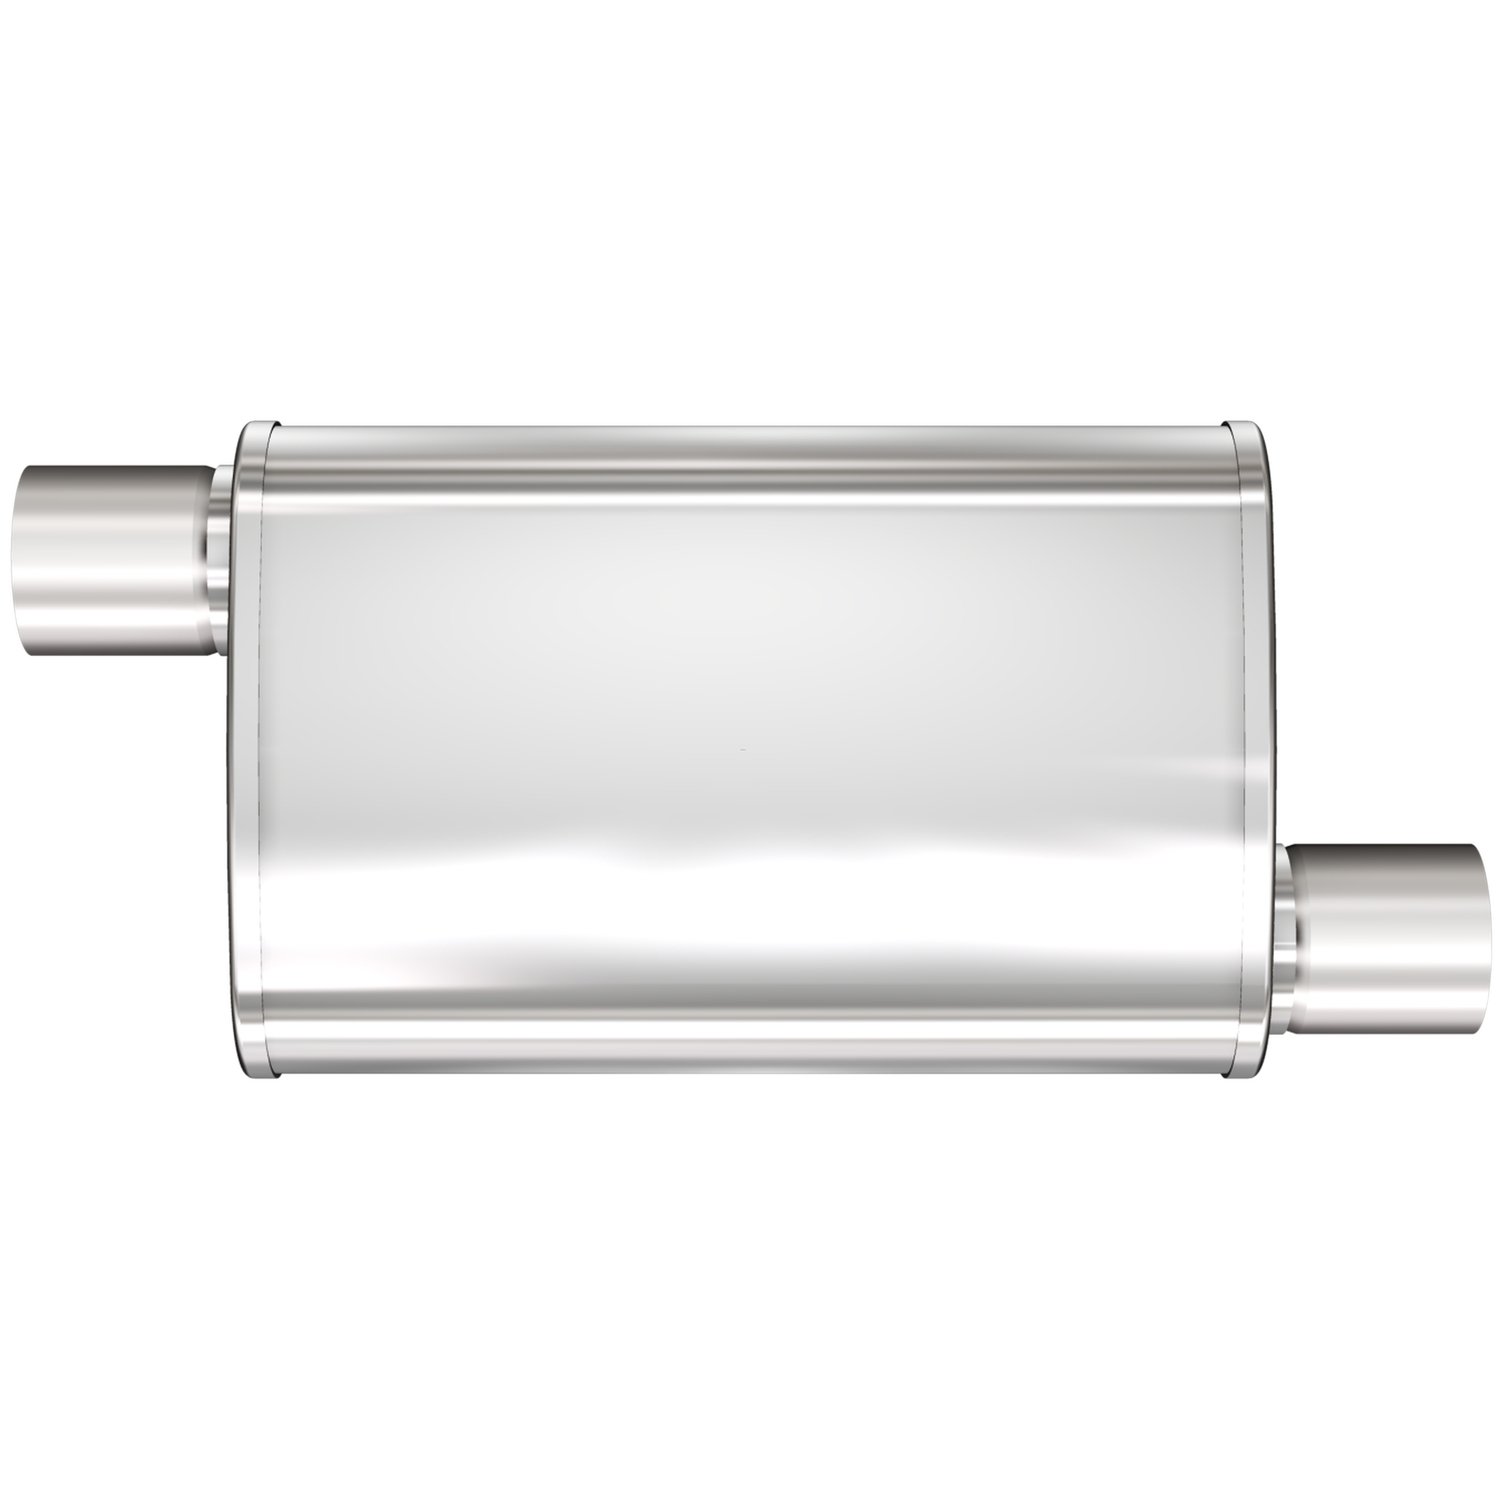 4" x 9" Oval XL 3-Chamber Muffler Offset In/Offset Out: 2.25"/2.25" Body Length: 14" Overall Length: 20" Satin Finish